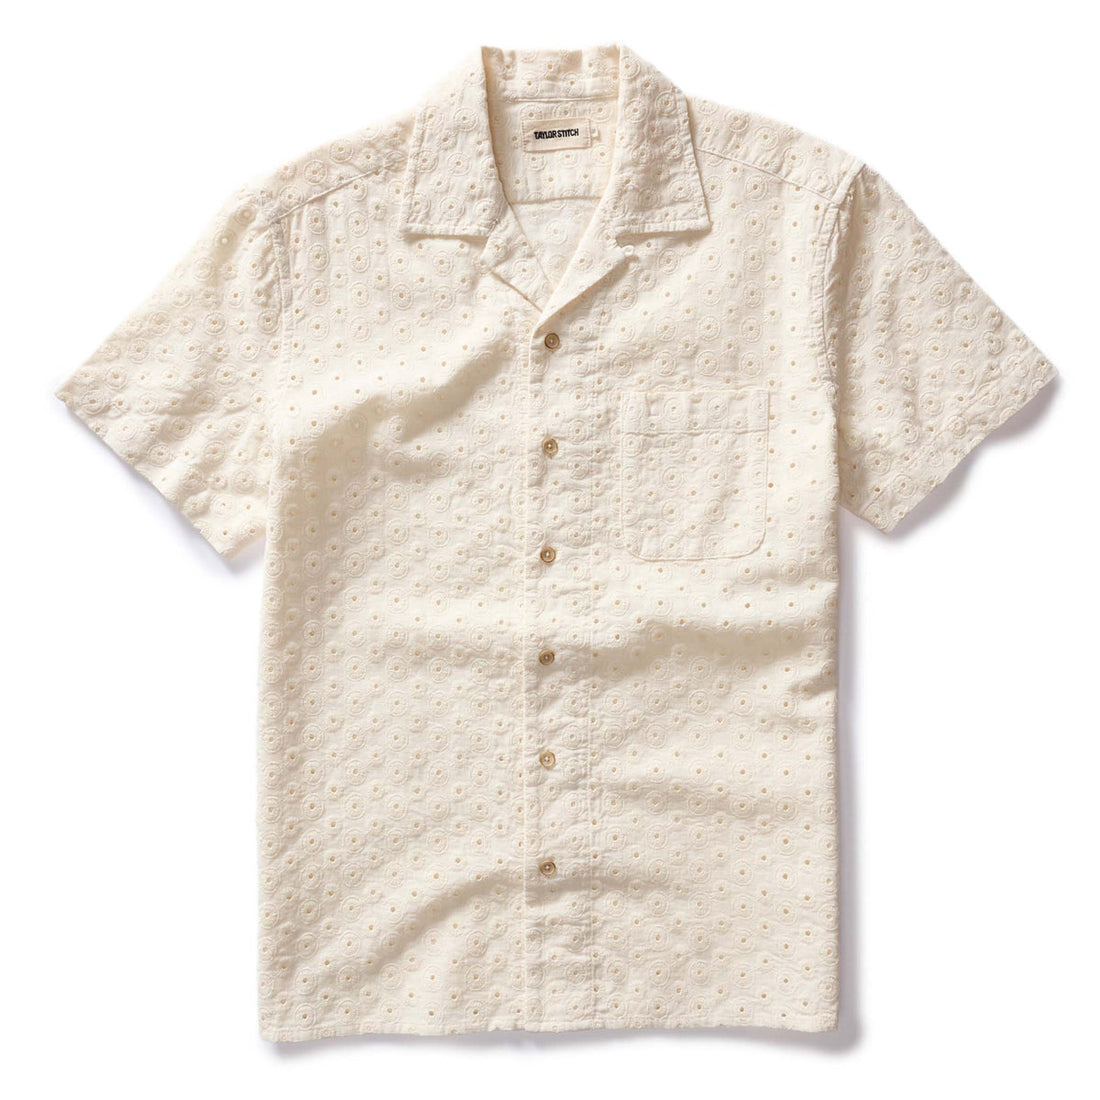 Taylor Stitch - The Short Sleeve Hawthorne in Vintage White Embroidered Eyelet